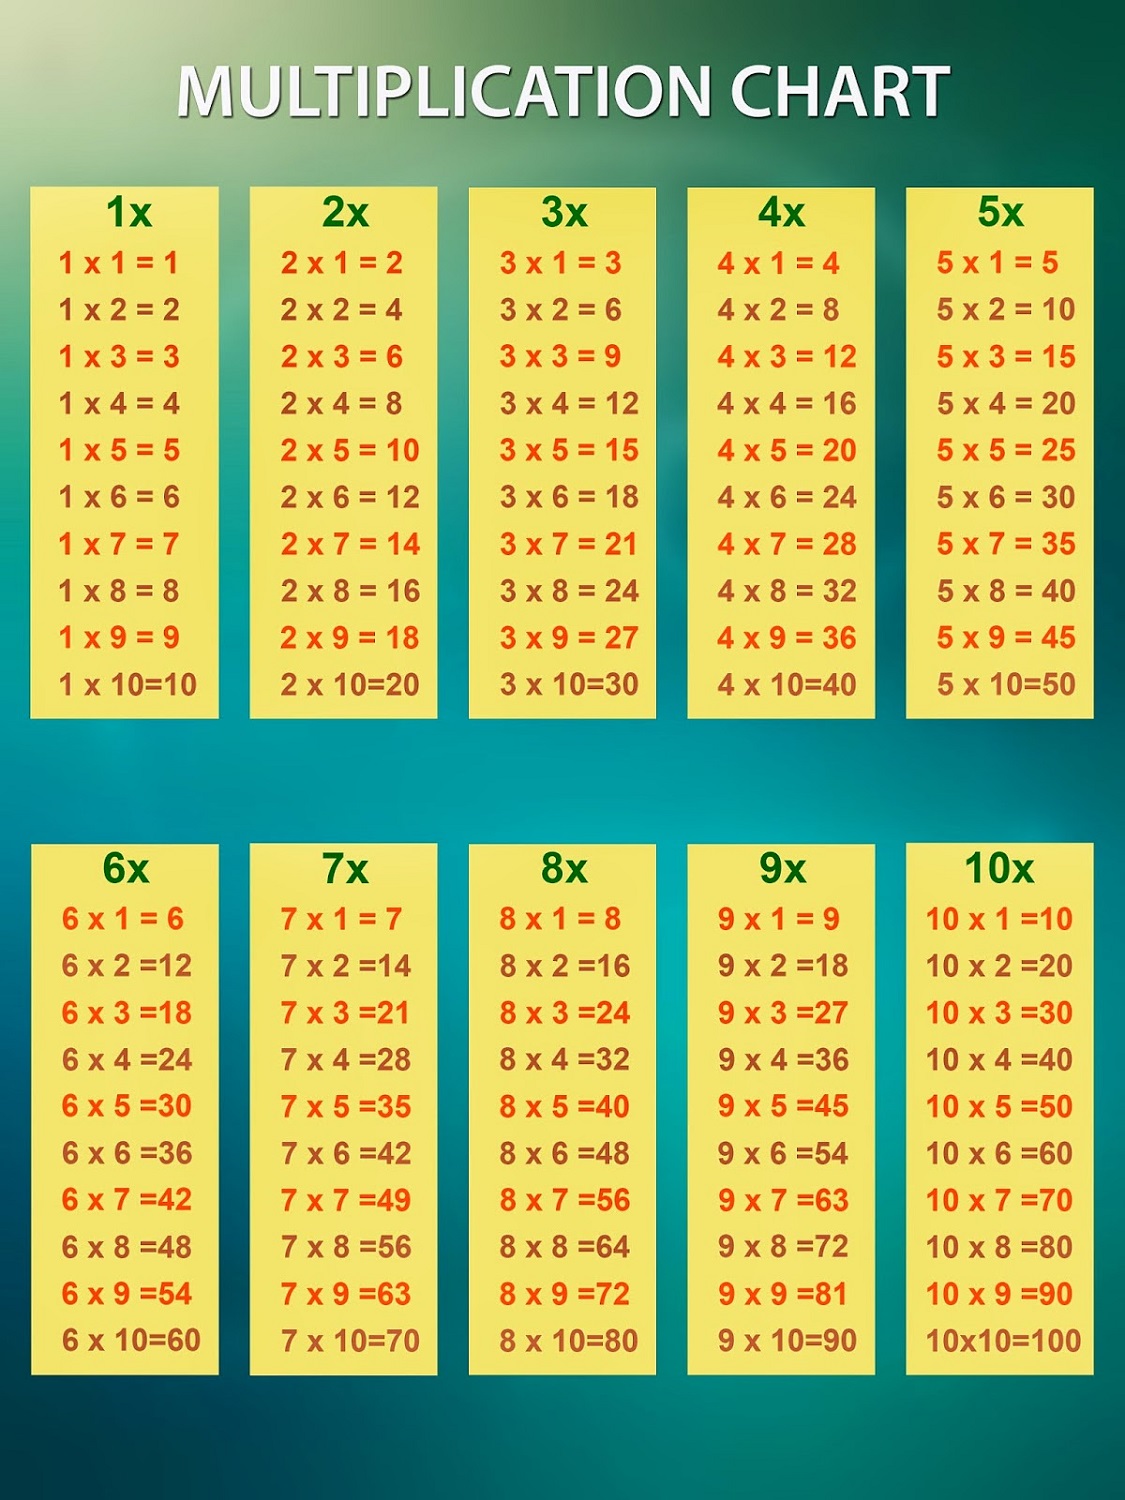 multiplication-table-chart-kids-can-use-the-times-tables-to-memorize-basic-multiplication